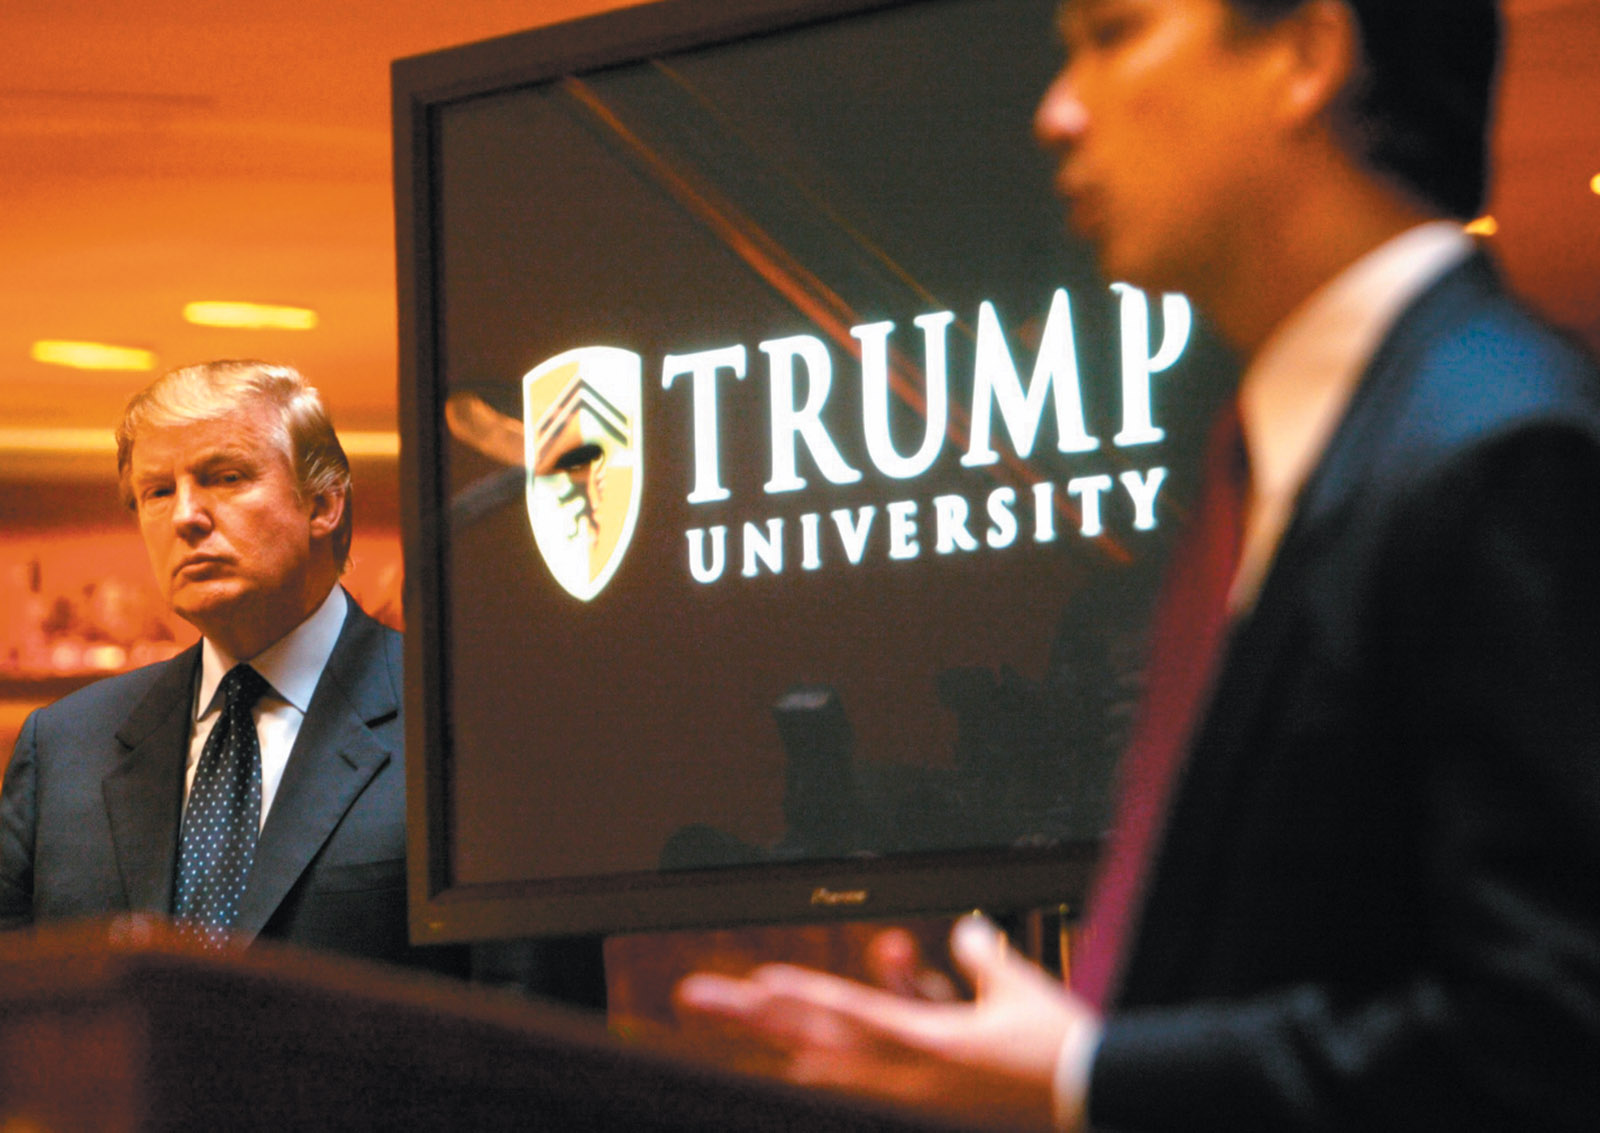 Donald Trump with Michael Sexton, the president of Trump University, at the announcement of its founding, New York City, May 2005